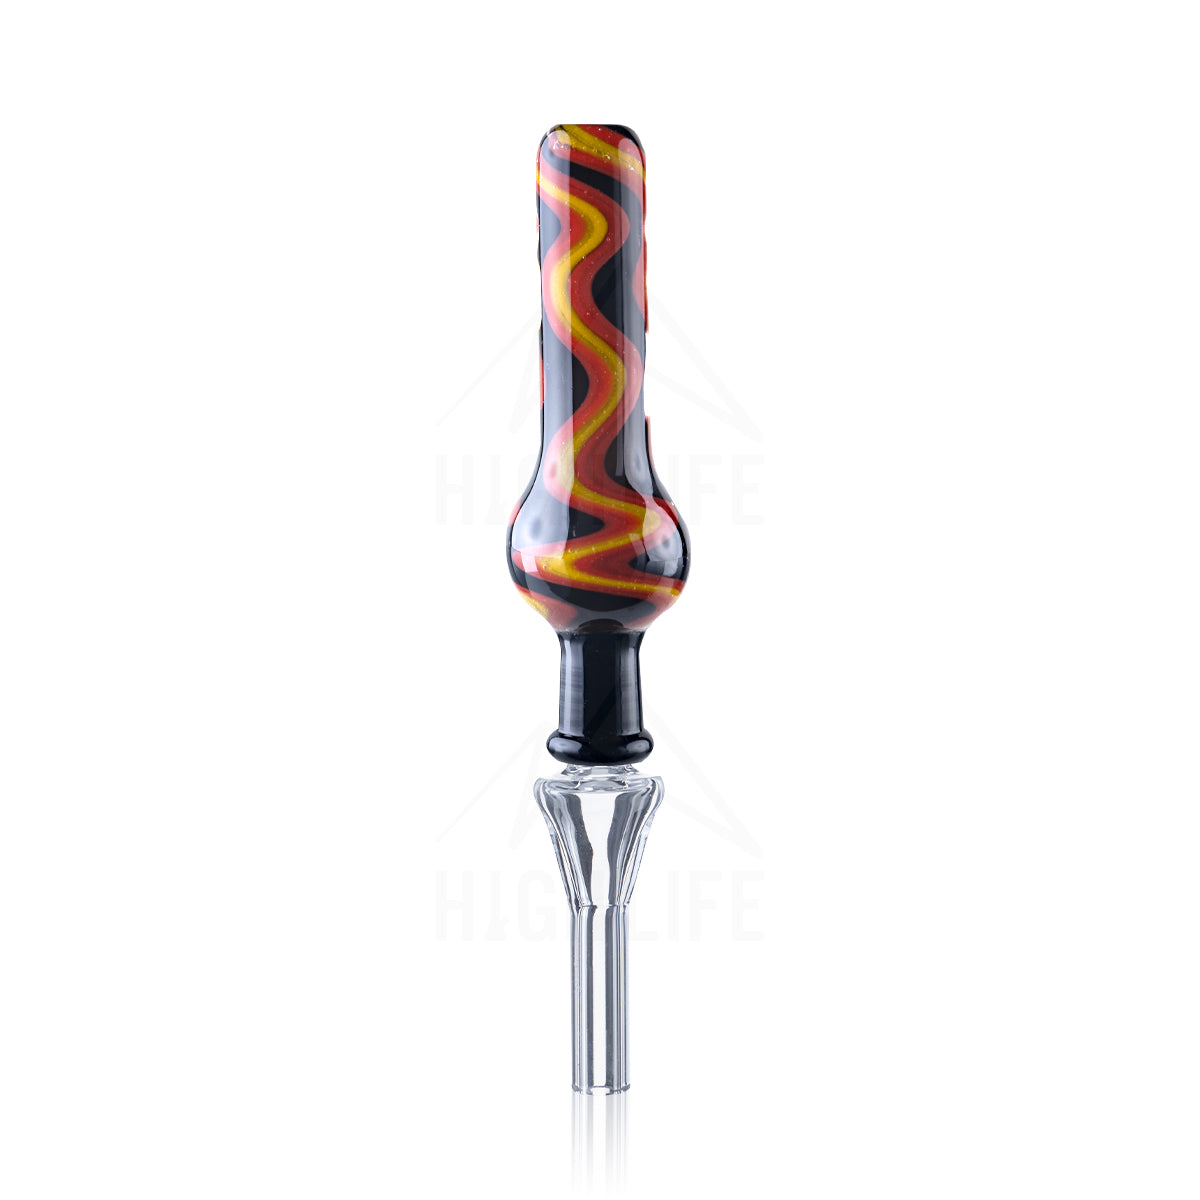 10mm Nectar Collector w/ Tip | Fire Ritual - Mix - hash pipes for sale